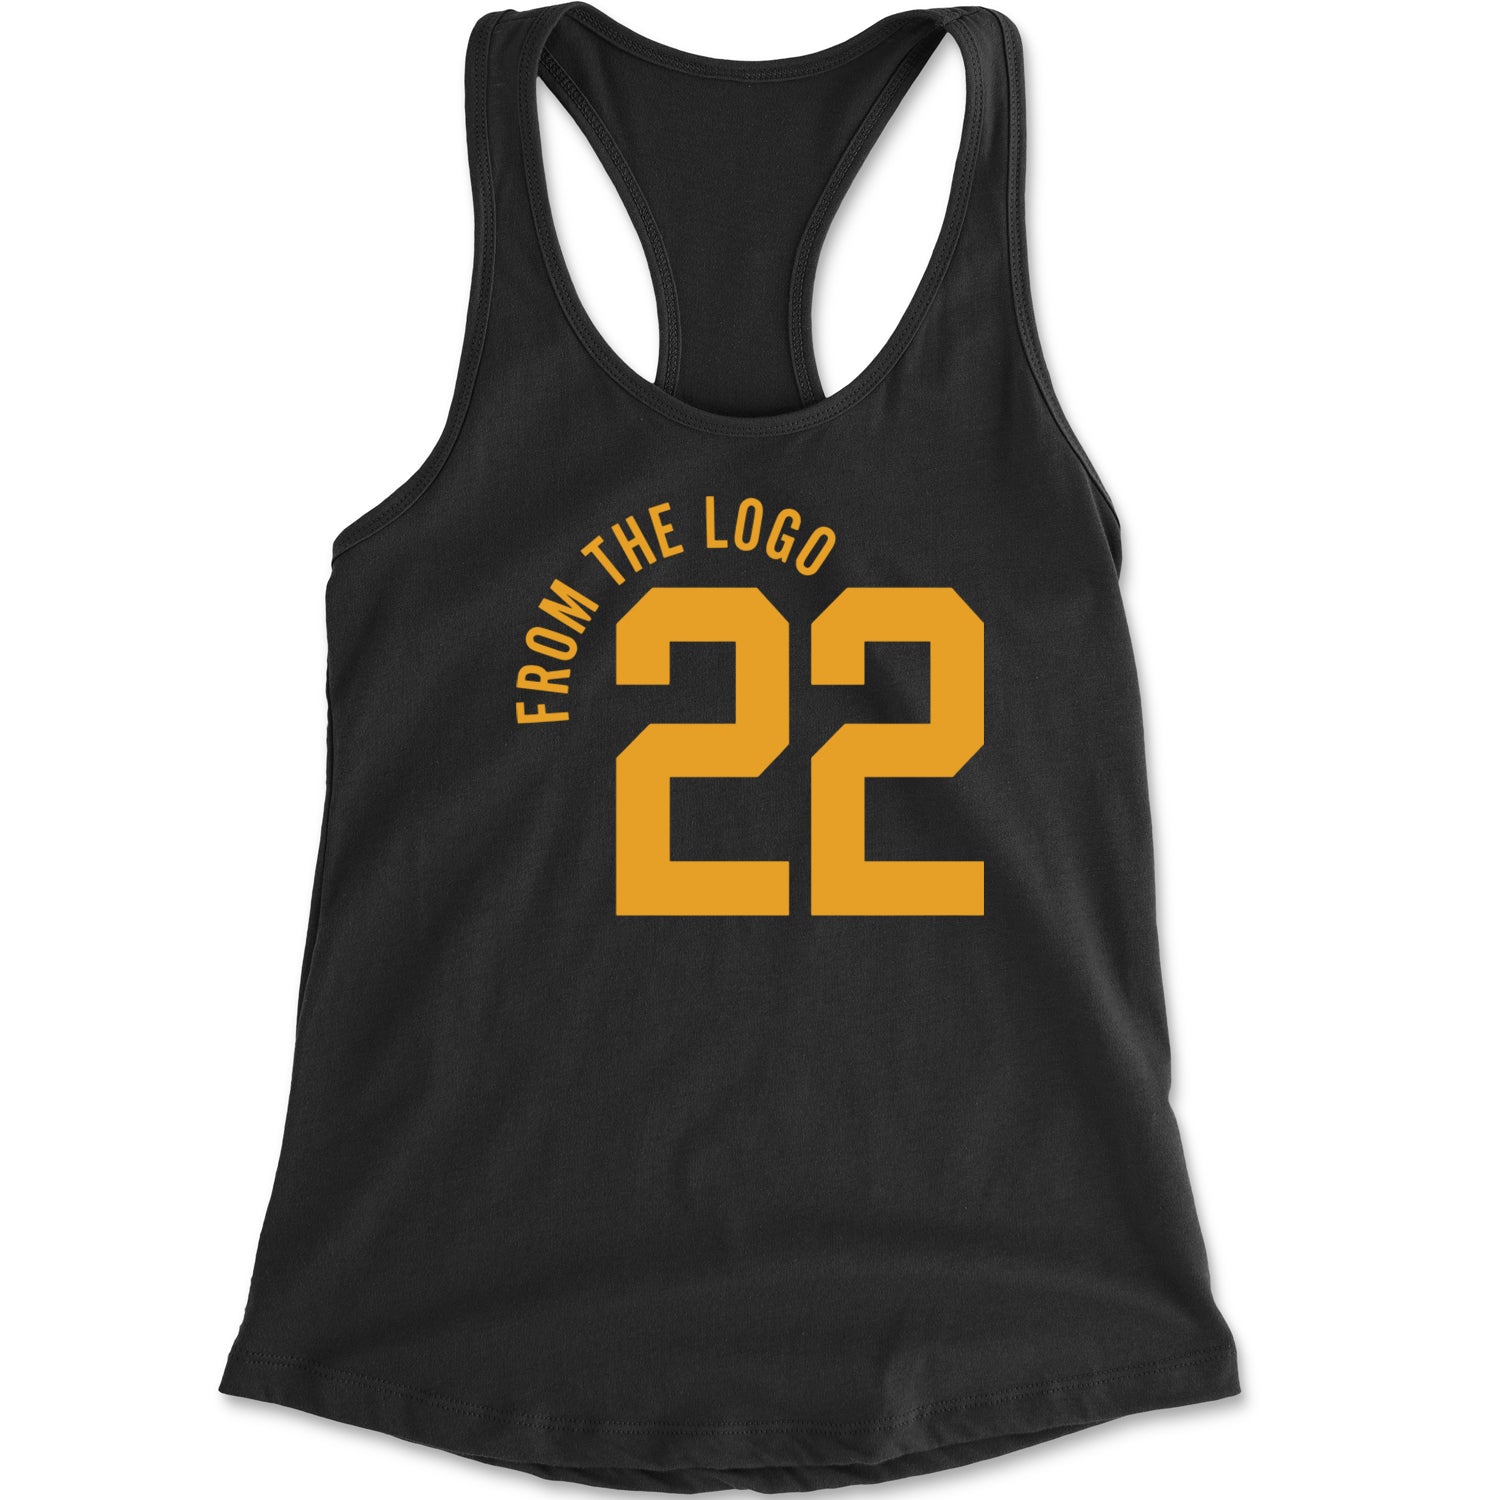 From The Logo #22 Basketball Racerback Tank Top for Women